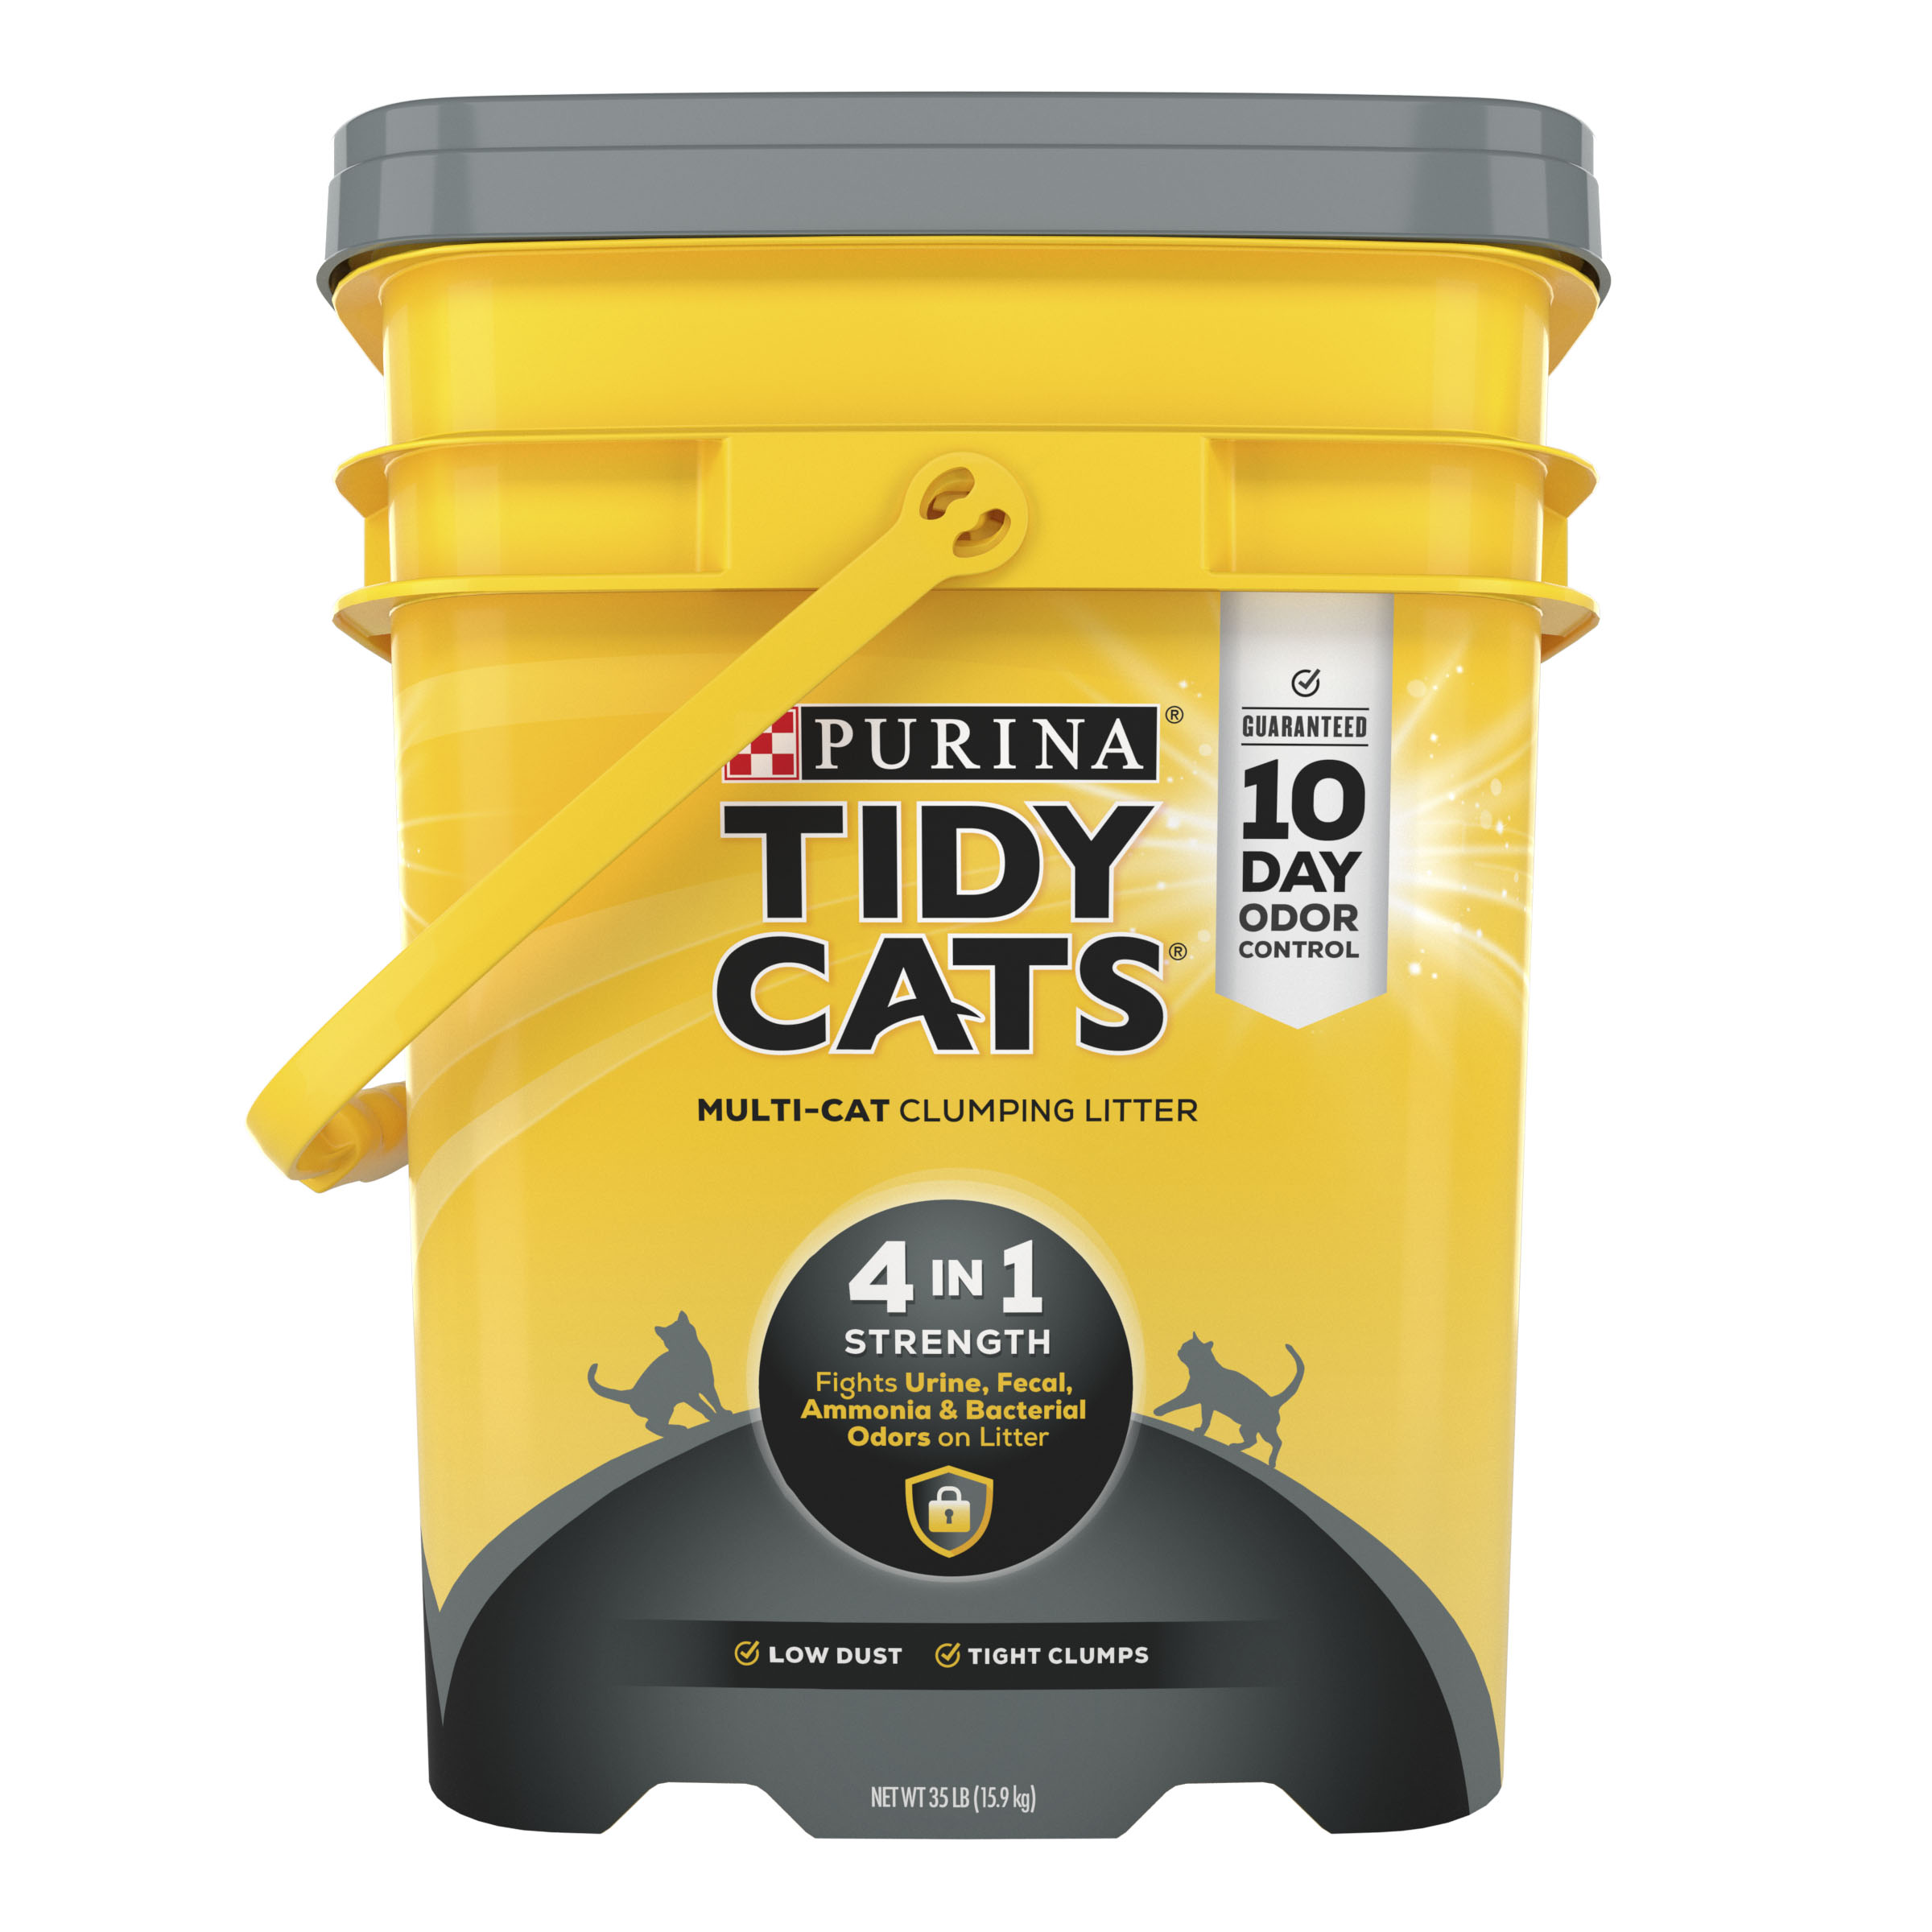 Purina Tidy Cats 4 In 1 Strength Multi Cat Clumping Litter Pail 35#